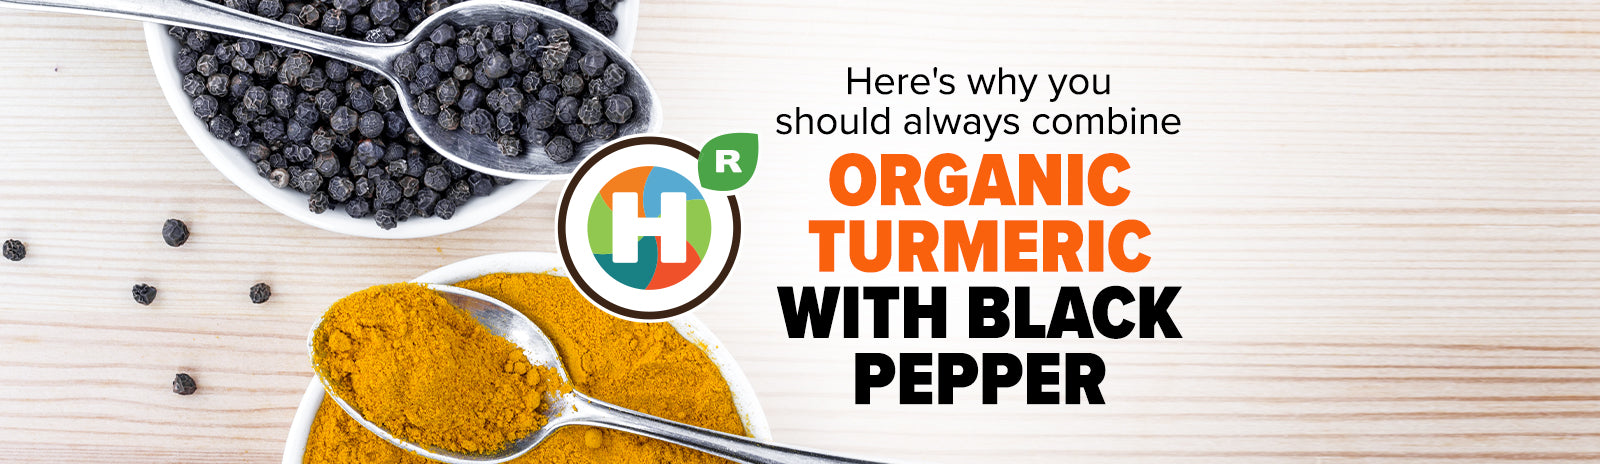 Here’s why you should combine organic turmeric with black pepper